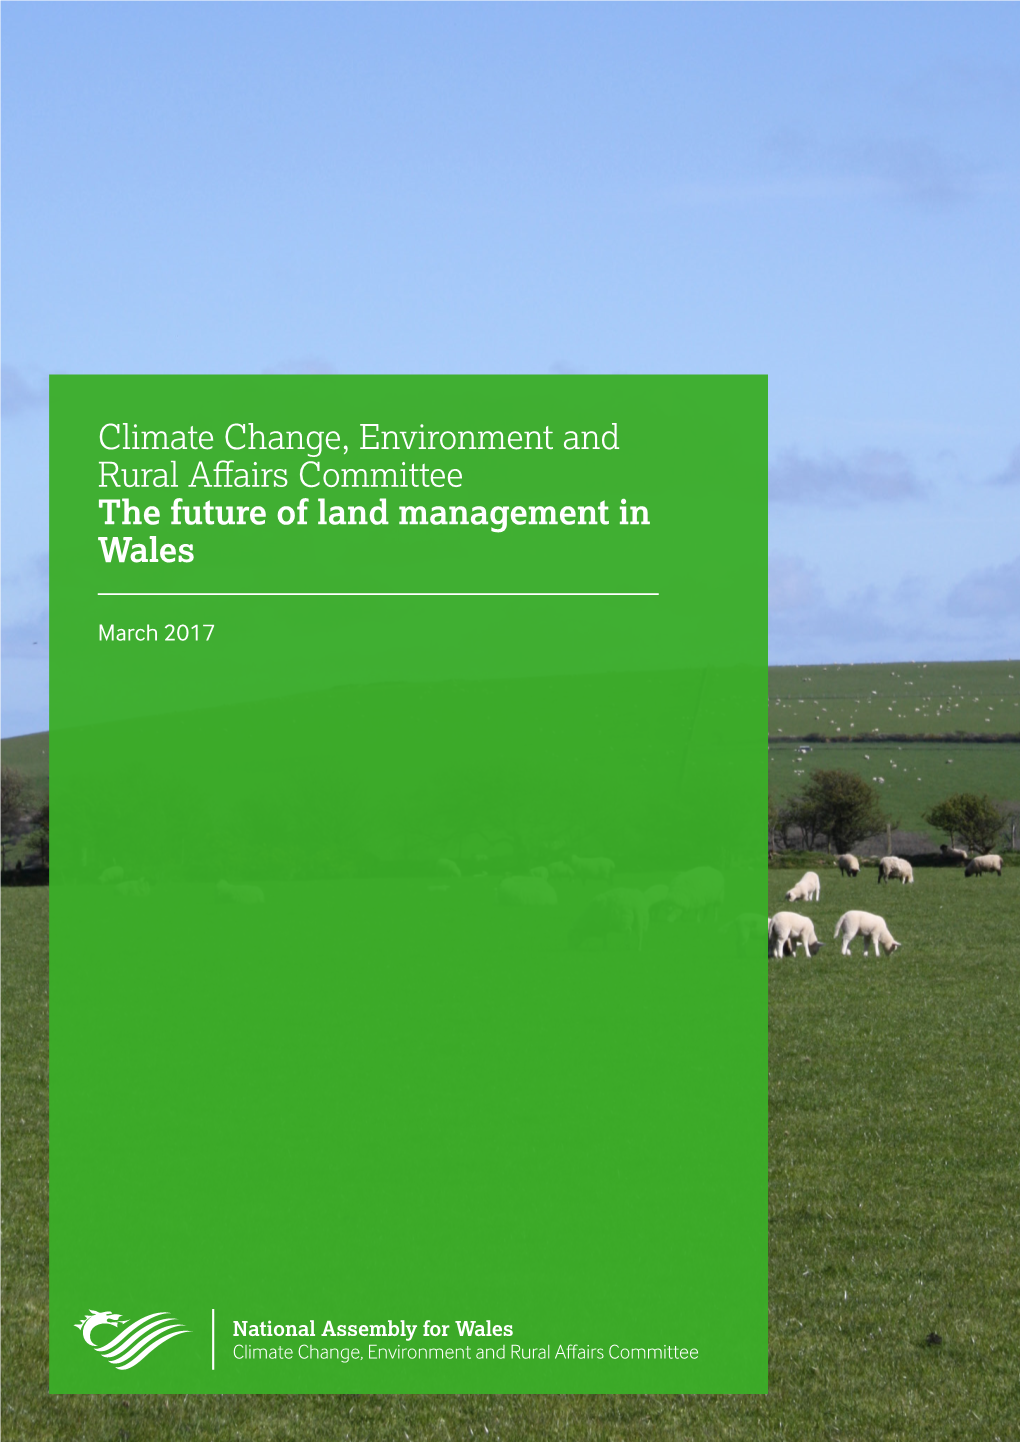 The Future of Land Management in Wales